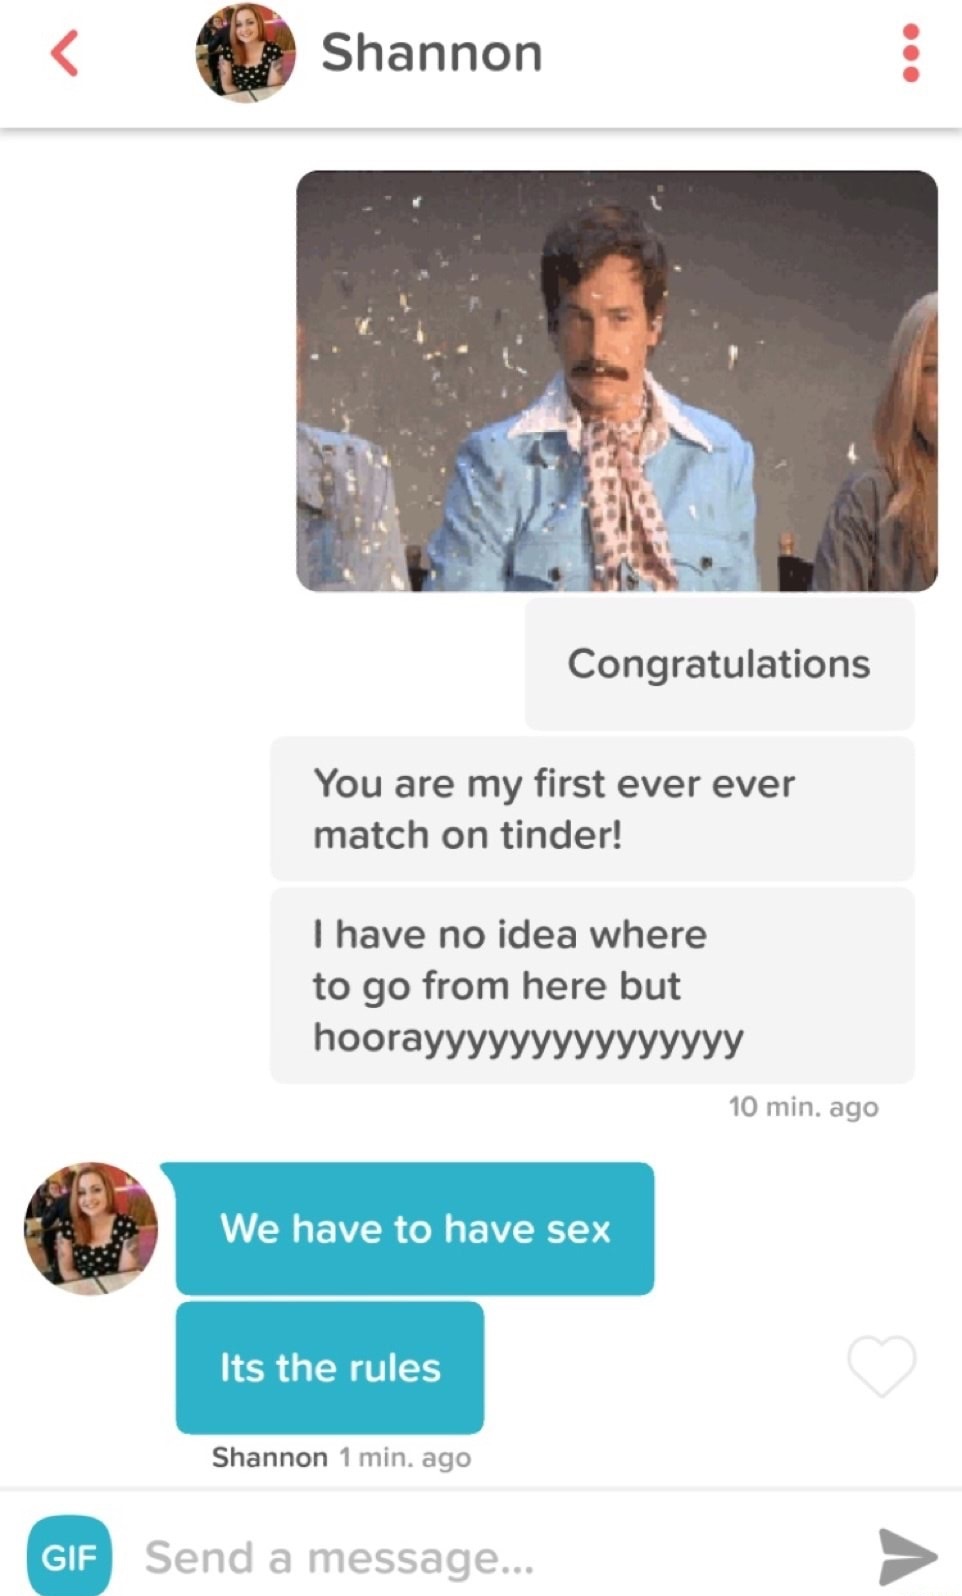 welcome to tinder meme - Shannon Congratulations You are my first ever ever match on tinder! I have no idea where to go from here but hoorayyyyyyyyyyyyyyy 10 min. ago We have to have sex Its the rules Shannon 1 min. ago Send a message...